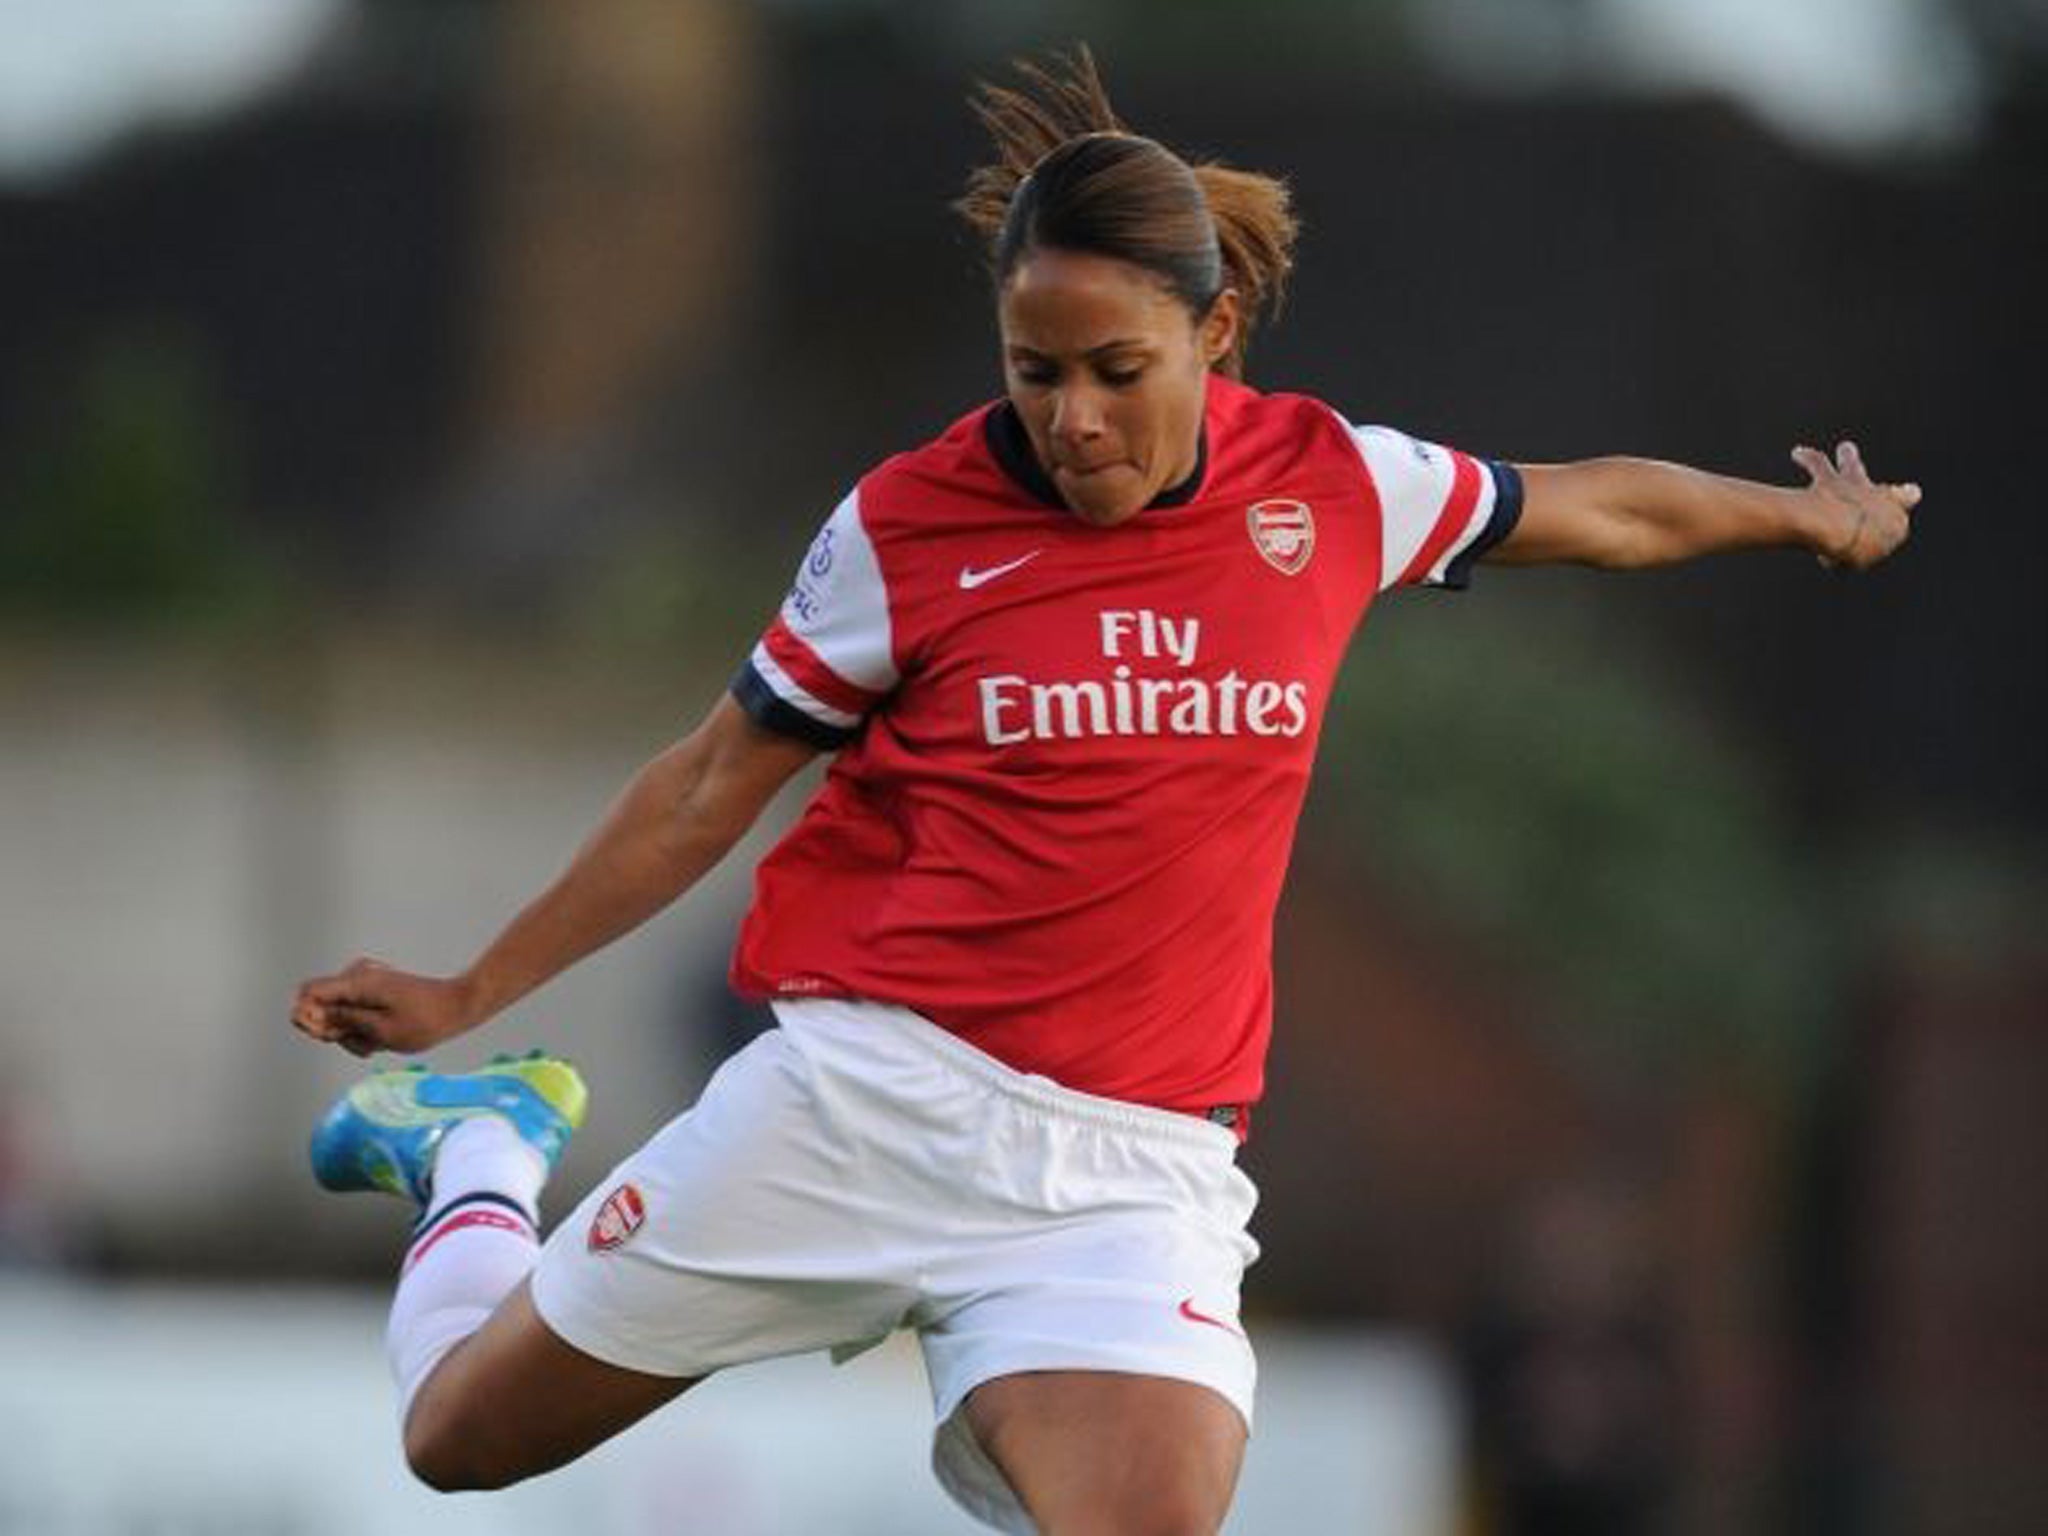 Wrong-footed: Alex Scott says Arsenal Ladies have failed to be proactive as investment has increased